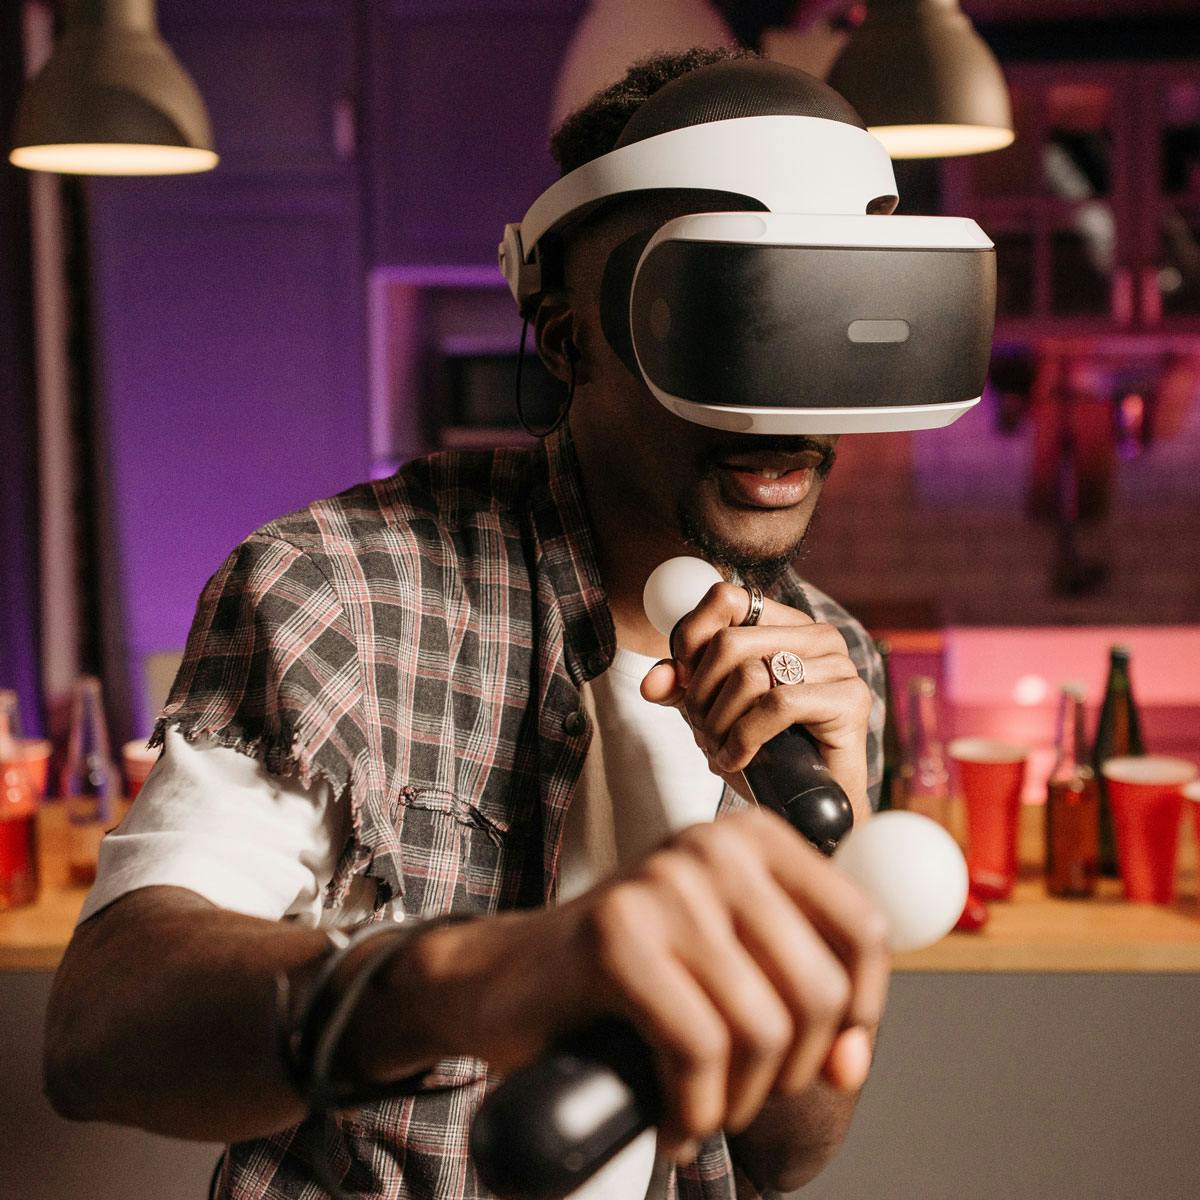 Low latency gives VR gamers a more immersive, enjoyable experience.